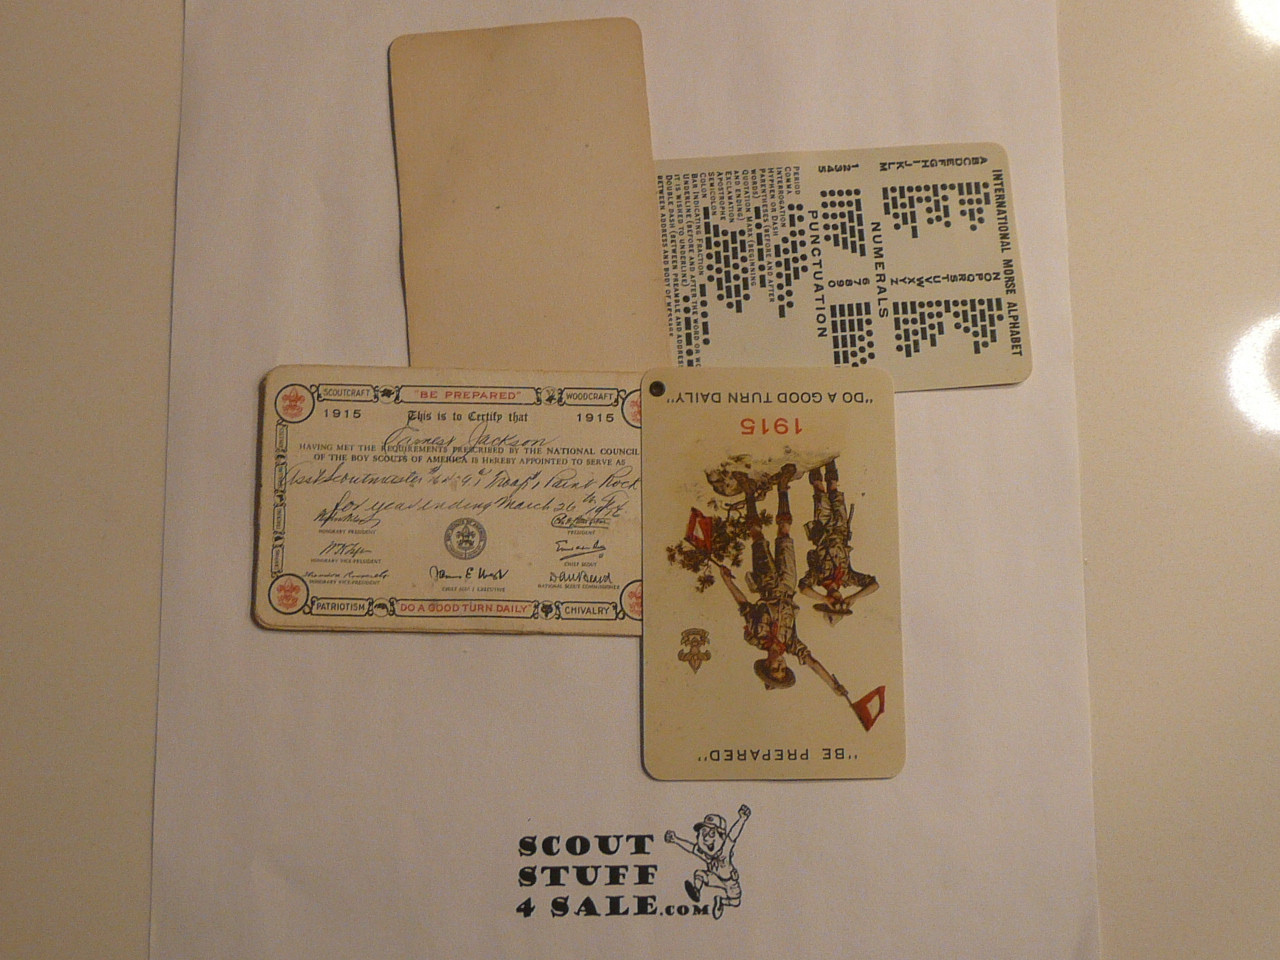 1916 Boy Scout SCOUTMASTER Celluloid Membership Card, 7 signatures, expires September 1916, 1916-2 variety, BSMC221